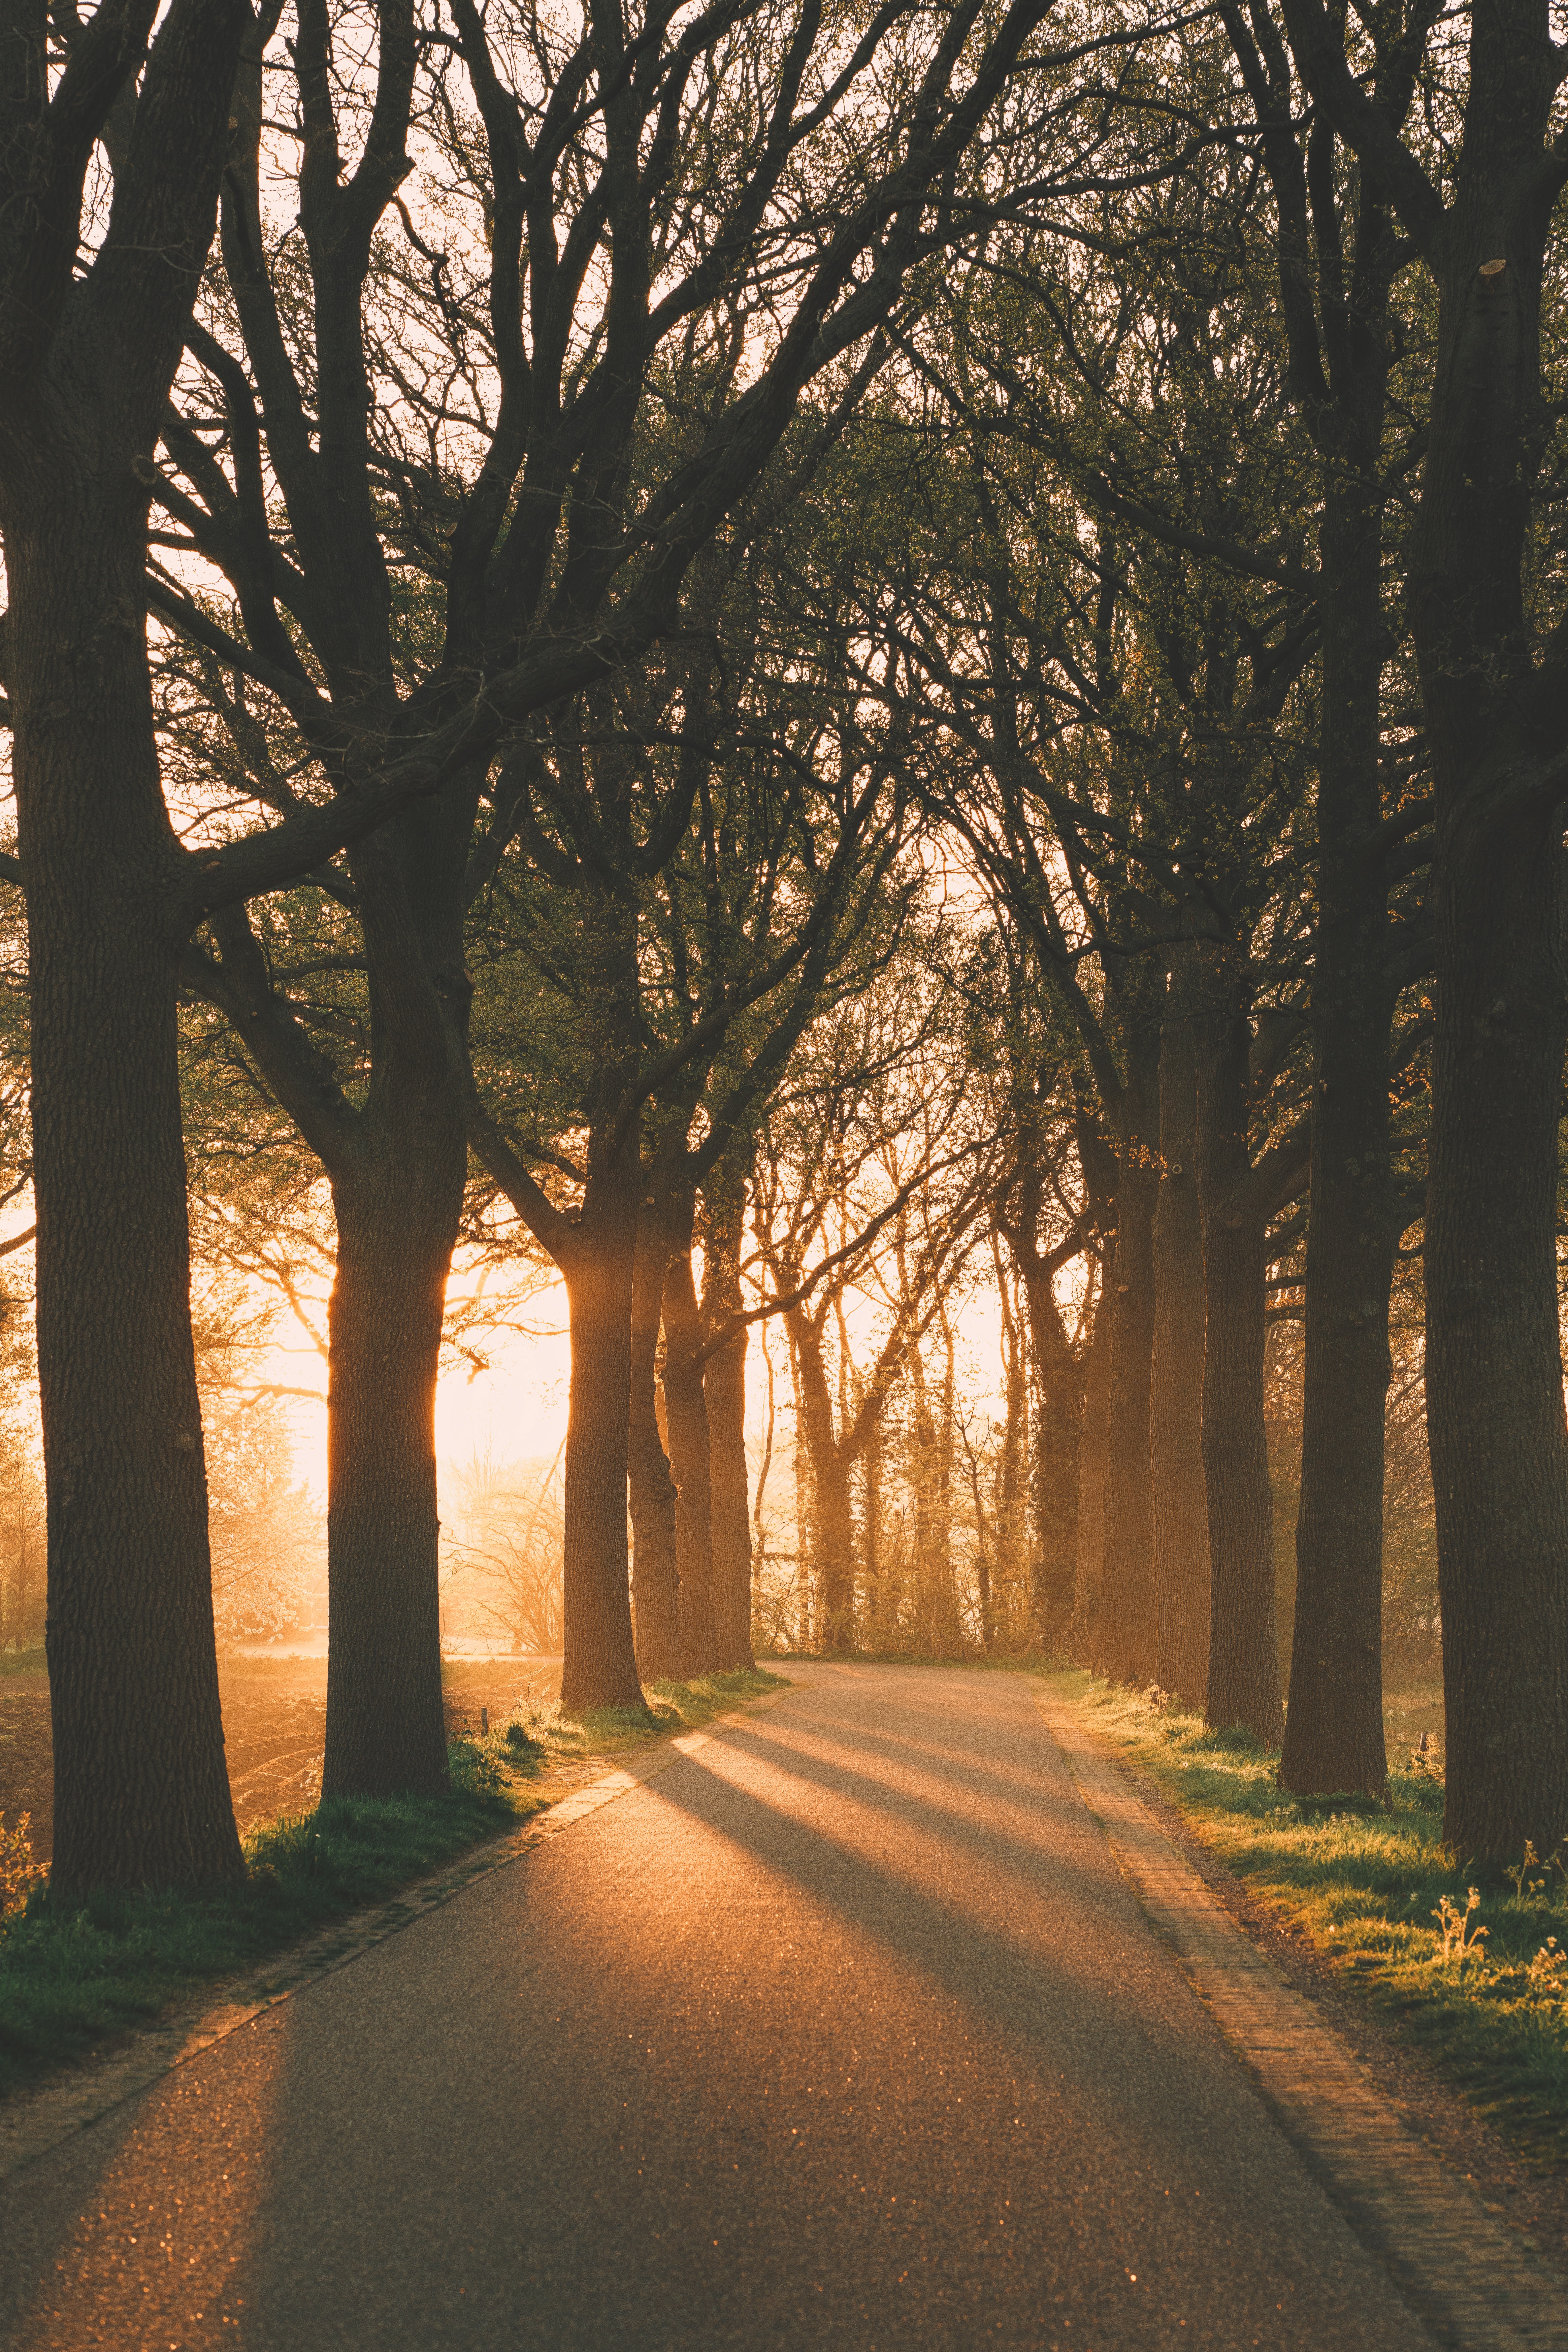 Wallpaper Full HD nature, trees, beams, rays, alley